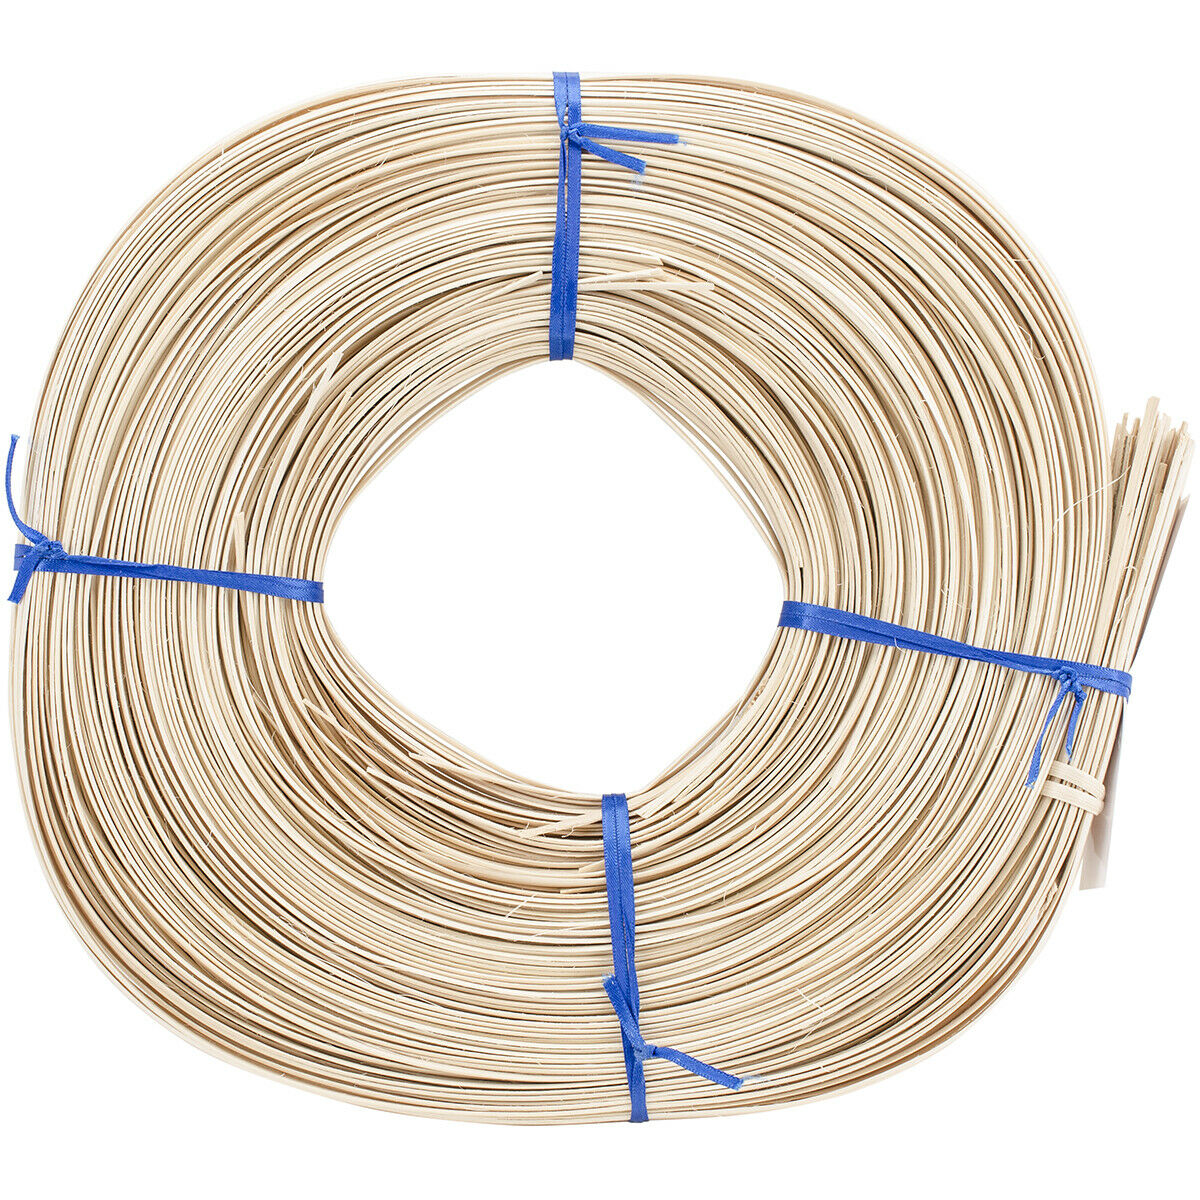 Flat Oval Reed 4.37mm 1lb Coil-approximately 320'